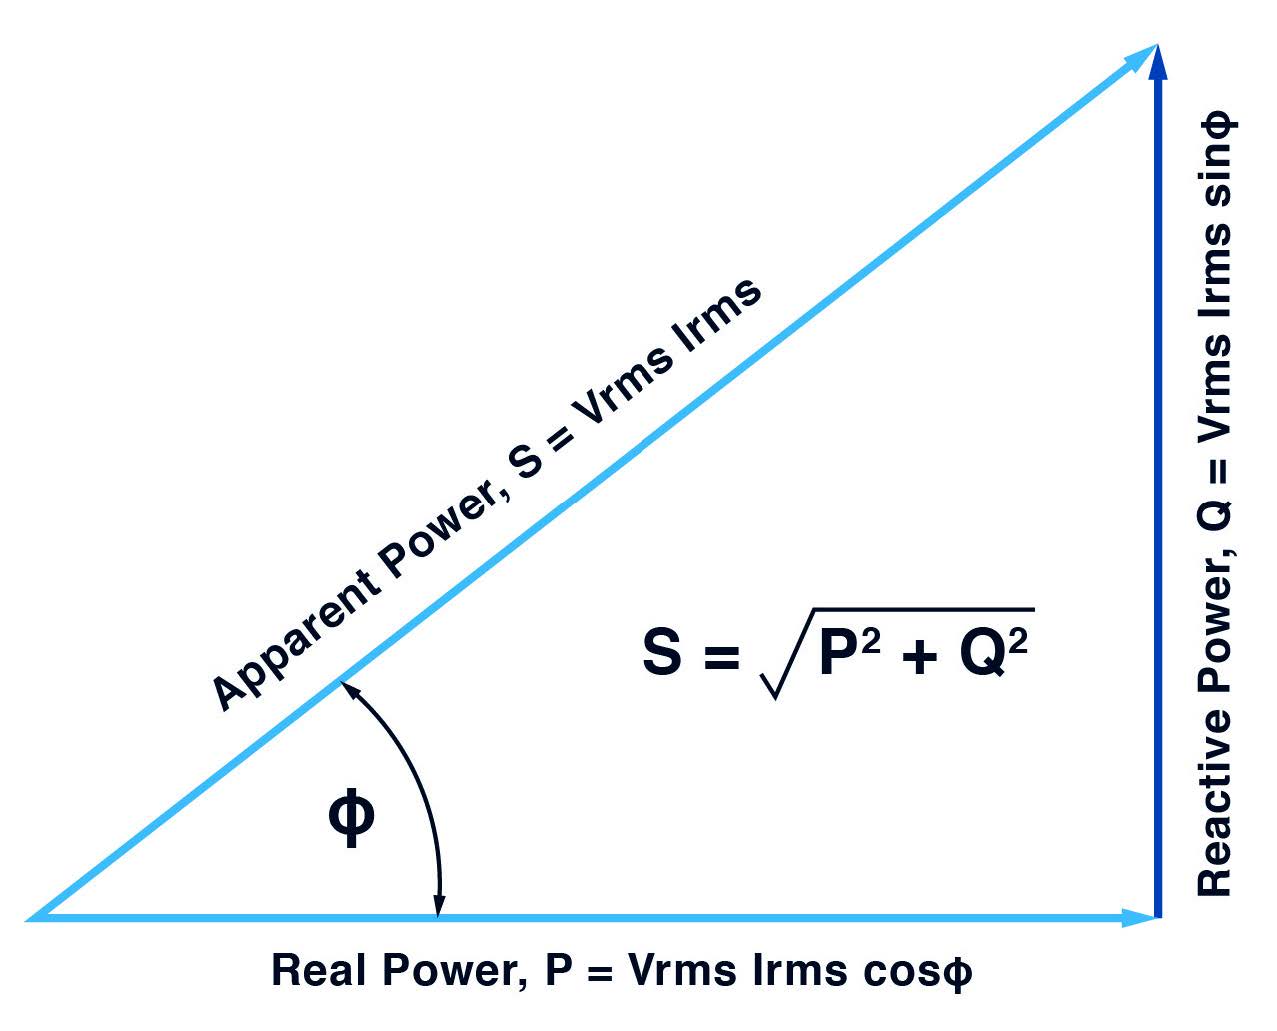 Power triangle showing real and reactive components and resulting apparent power vector